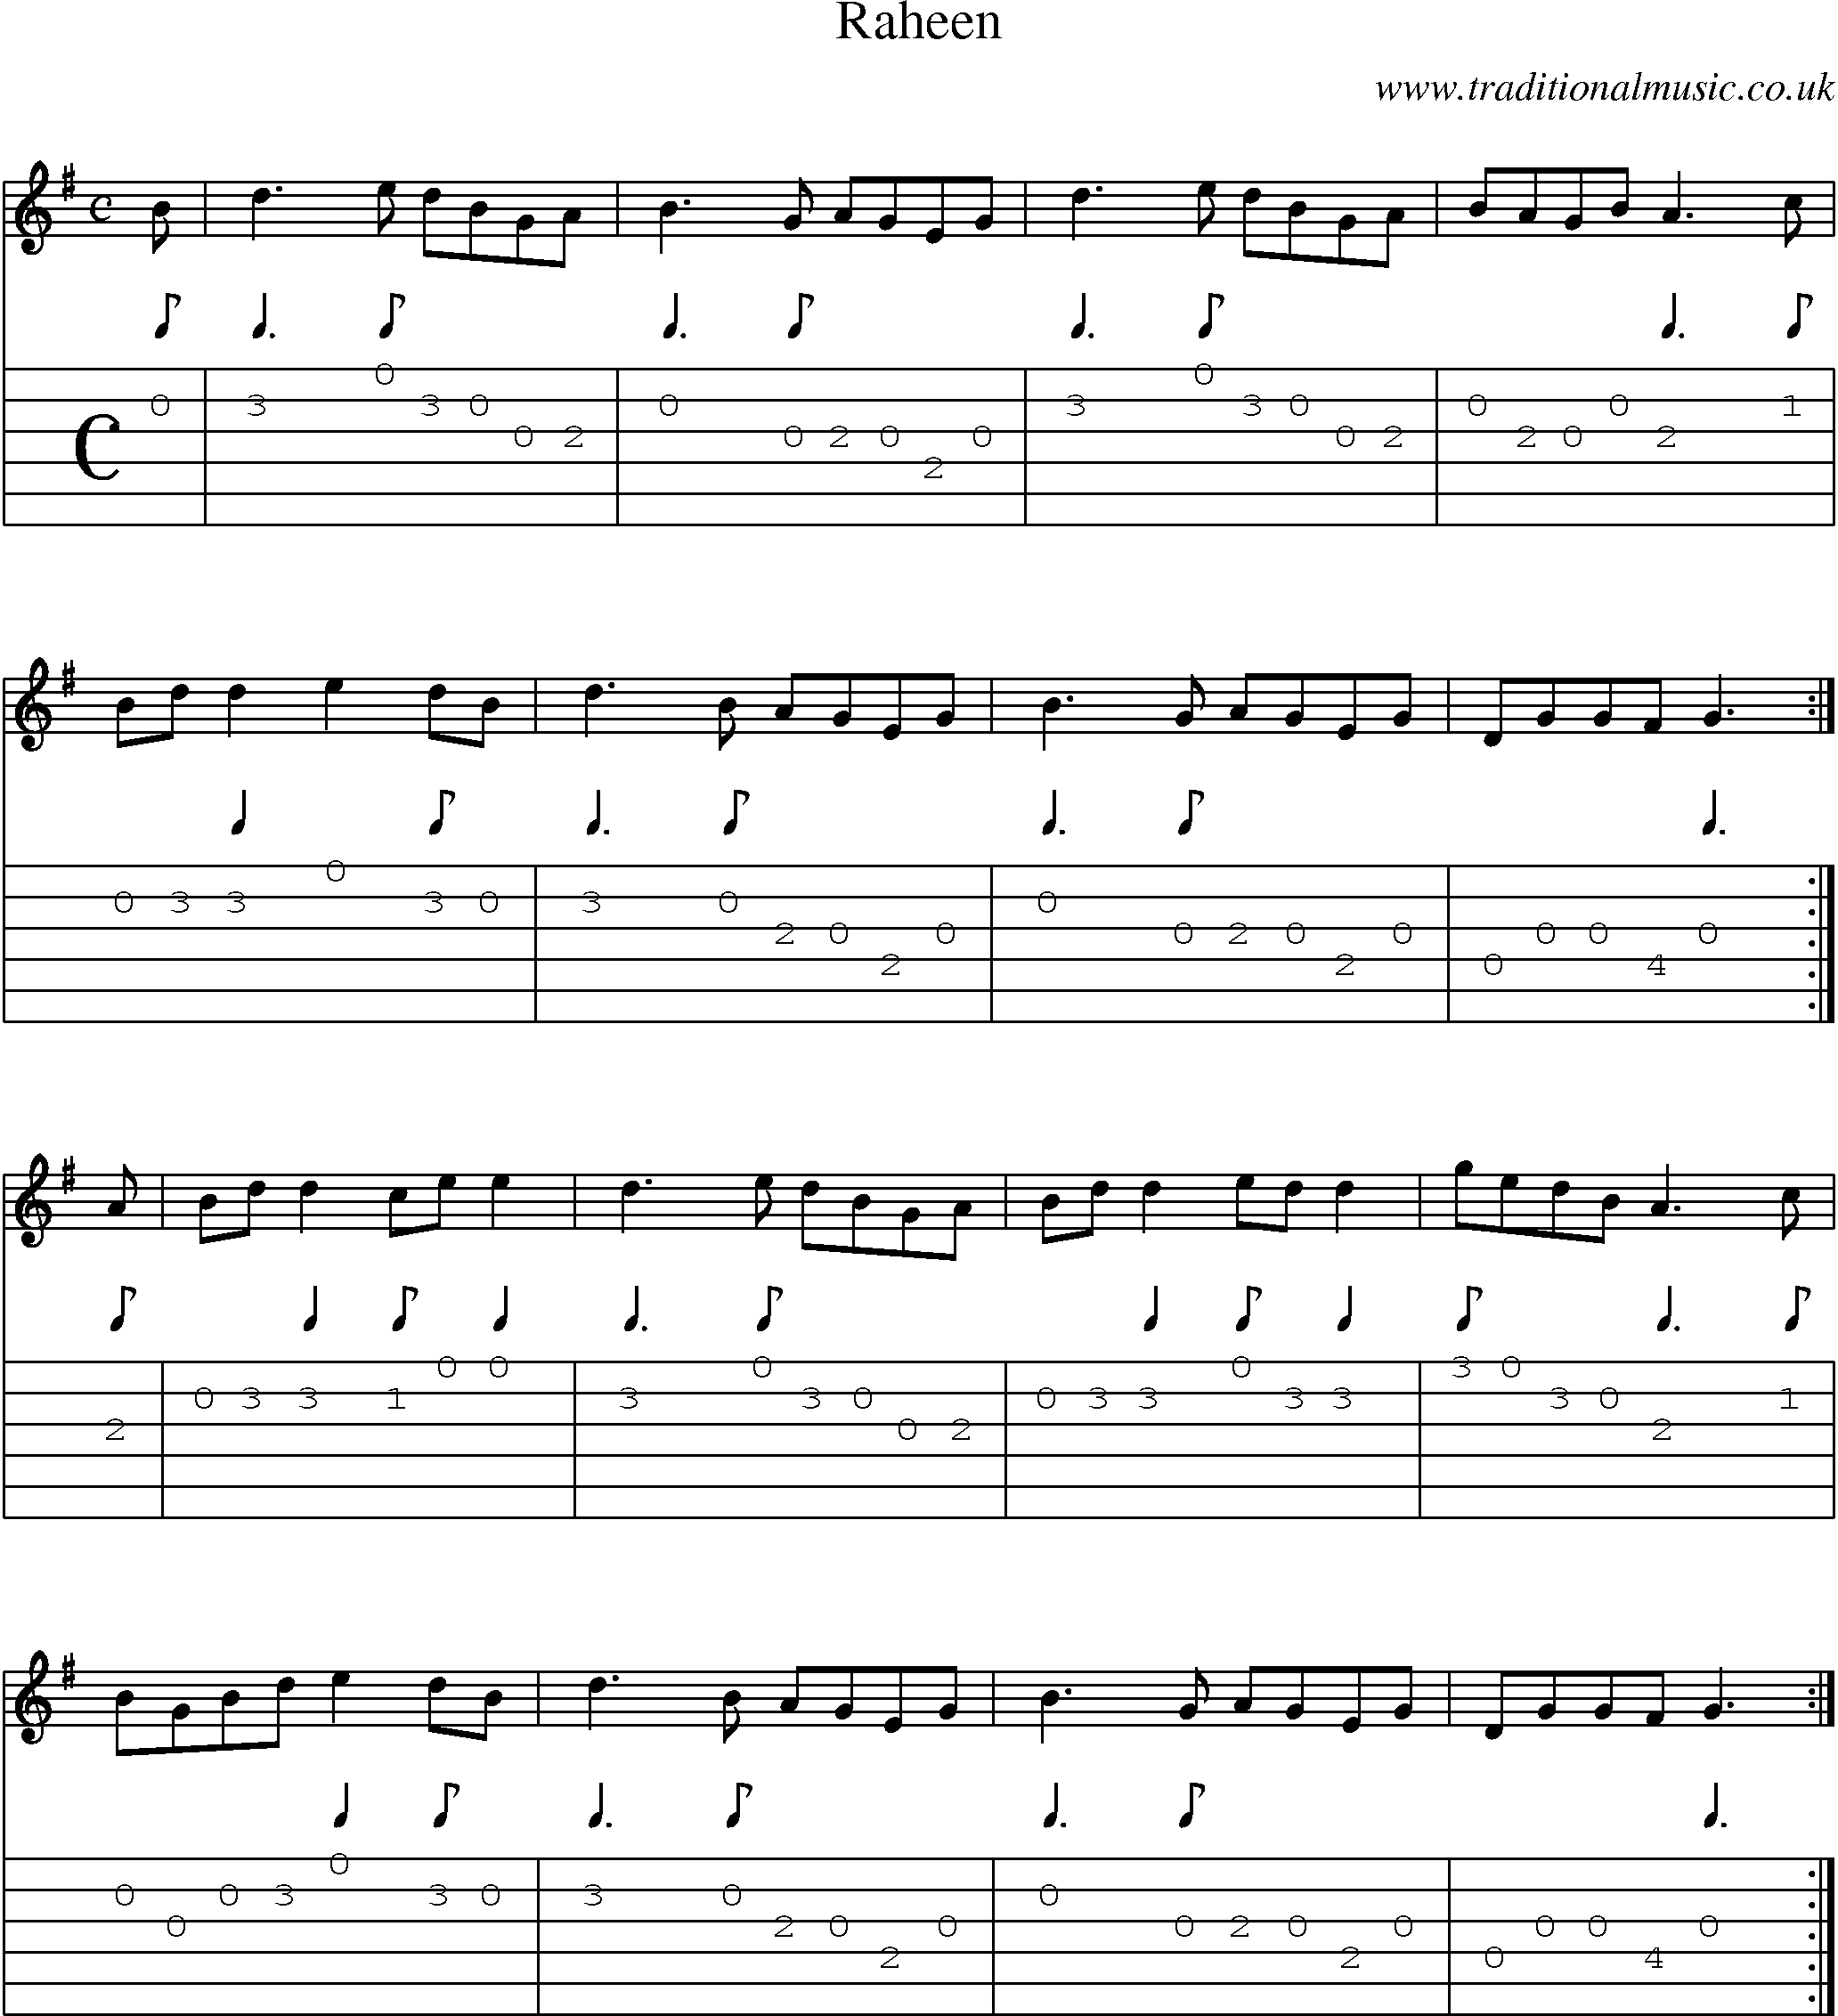 Music Score and Guitar Tabs for Raheen